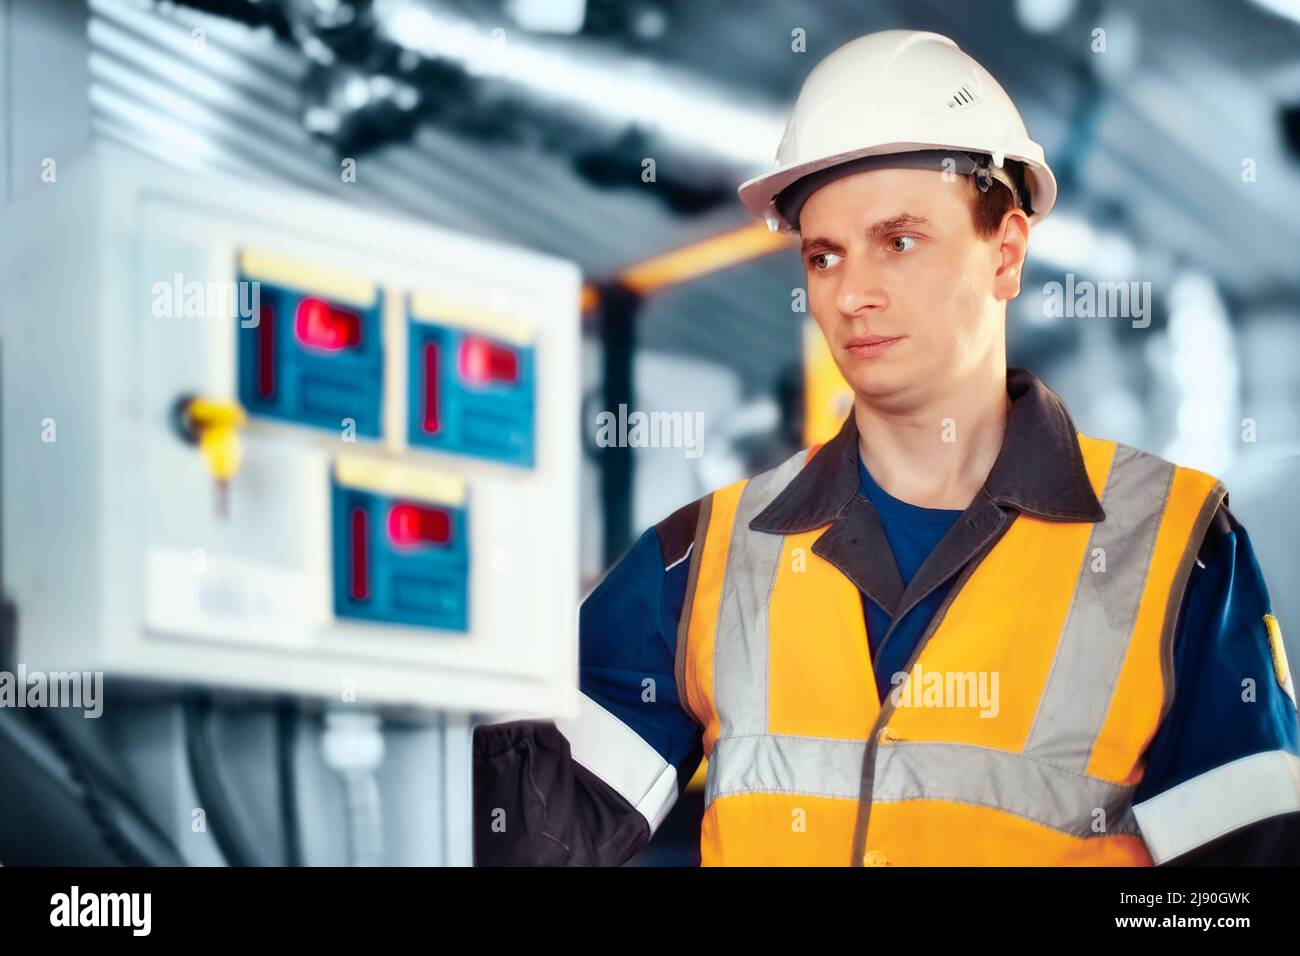 Industrial engineer in helmet inspects or adjusts equipment at gas processing plant or plant. Authentic scene workflow. Stock Photo